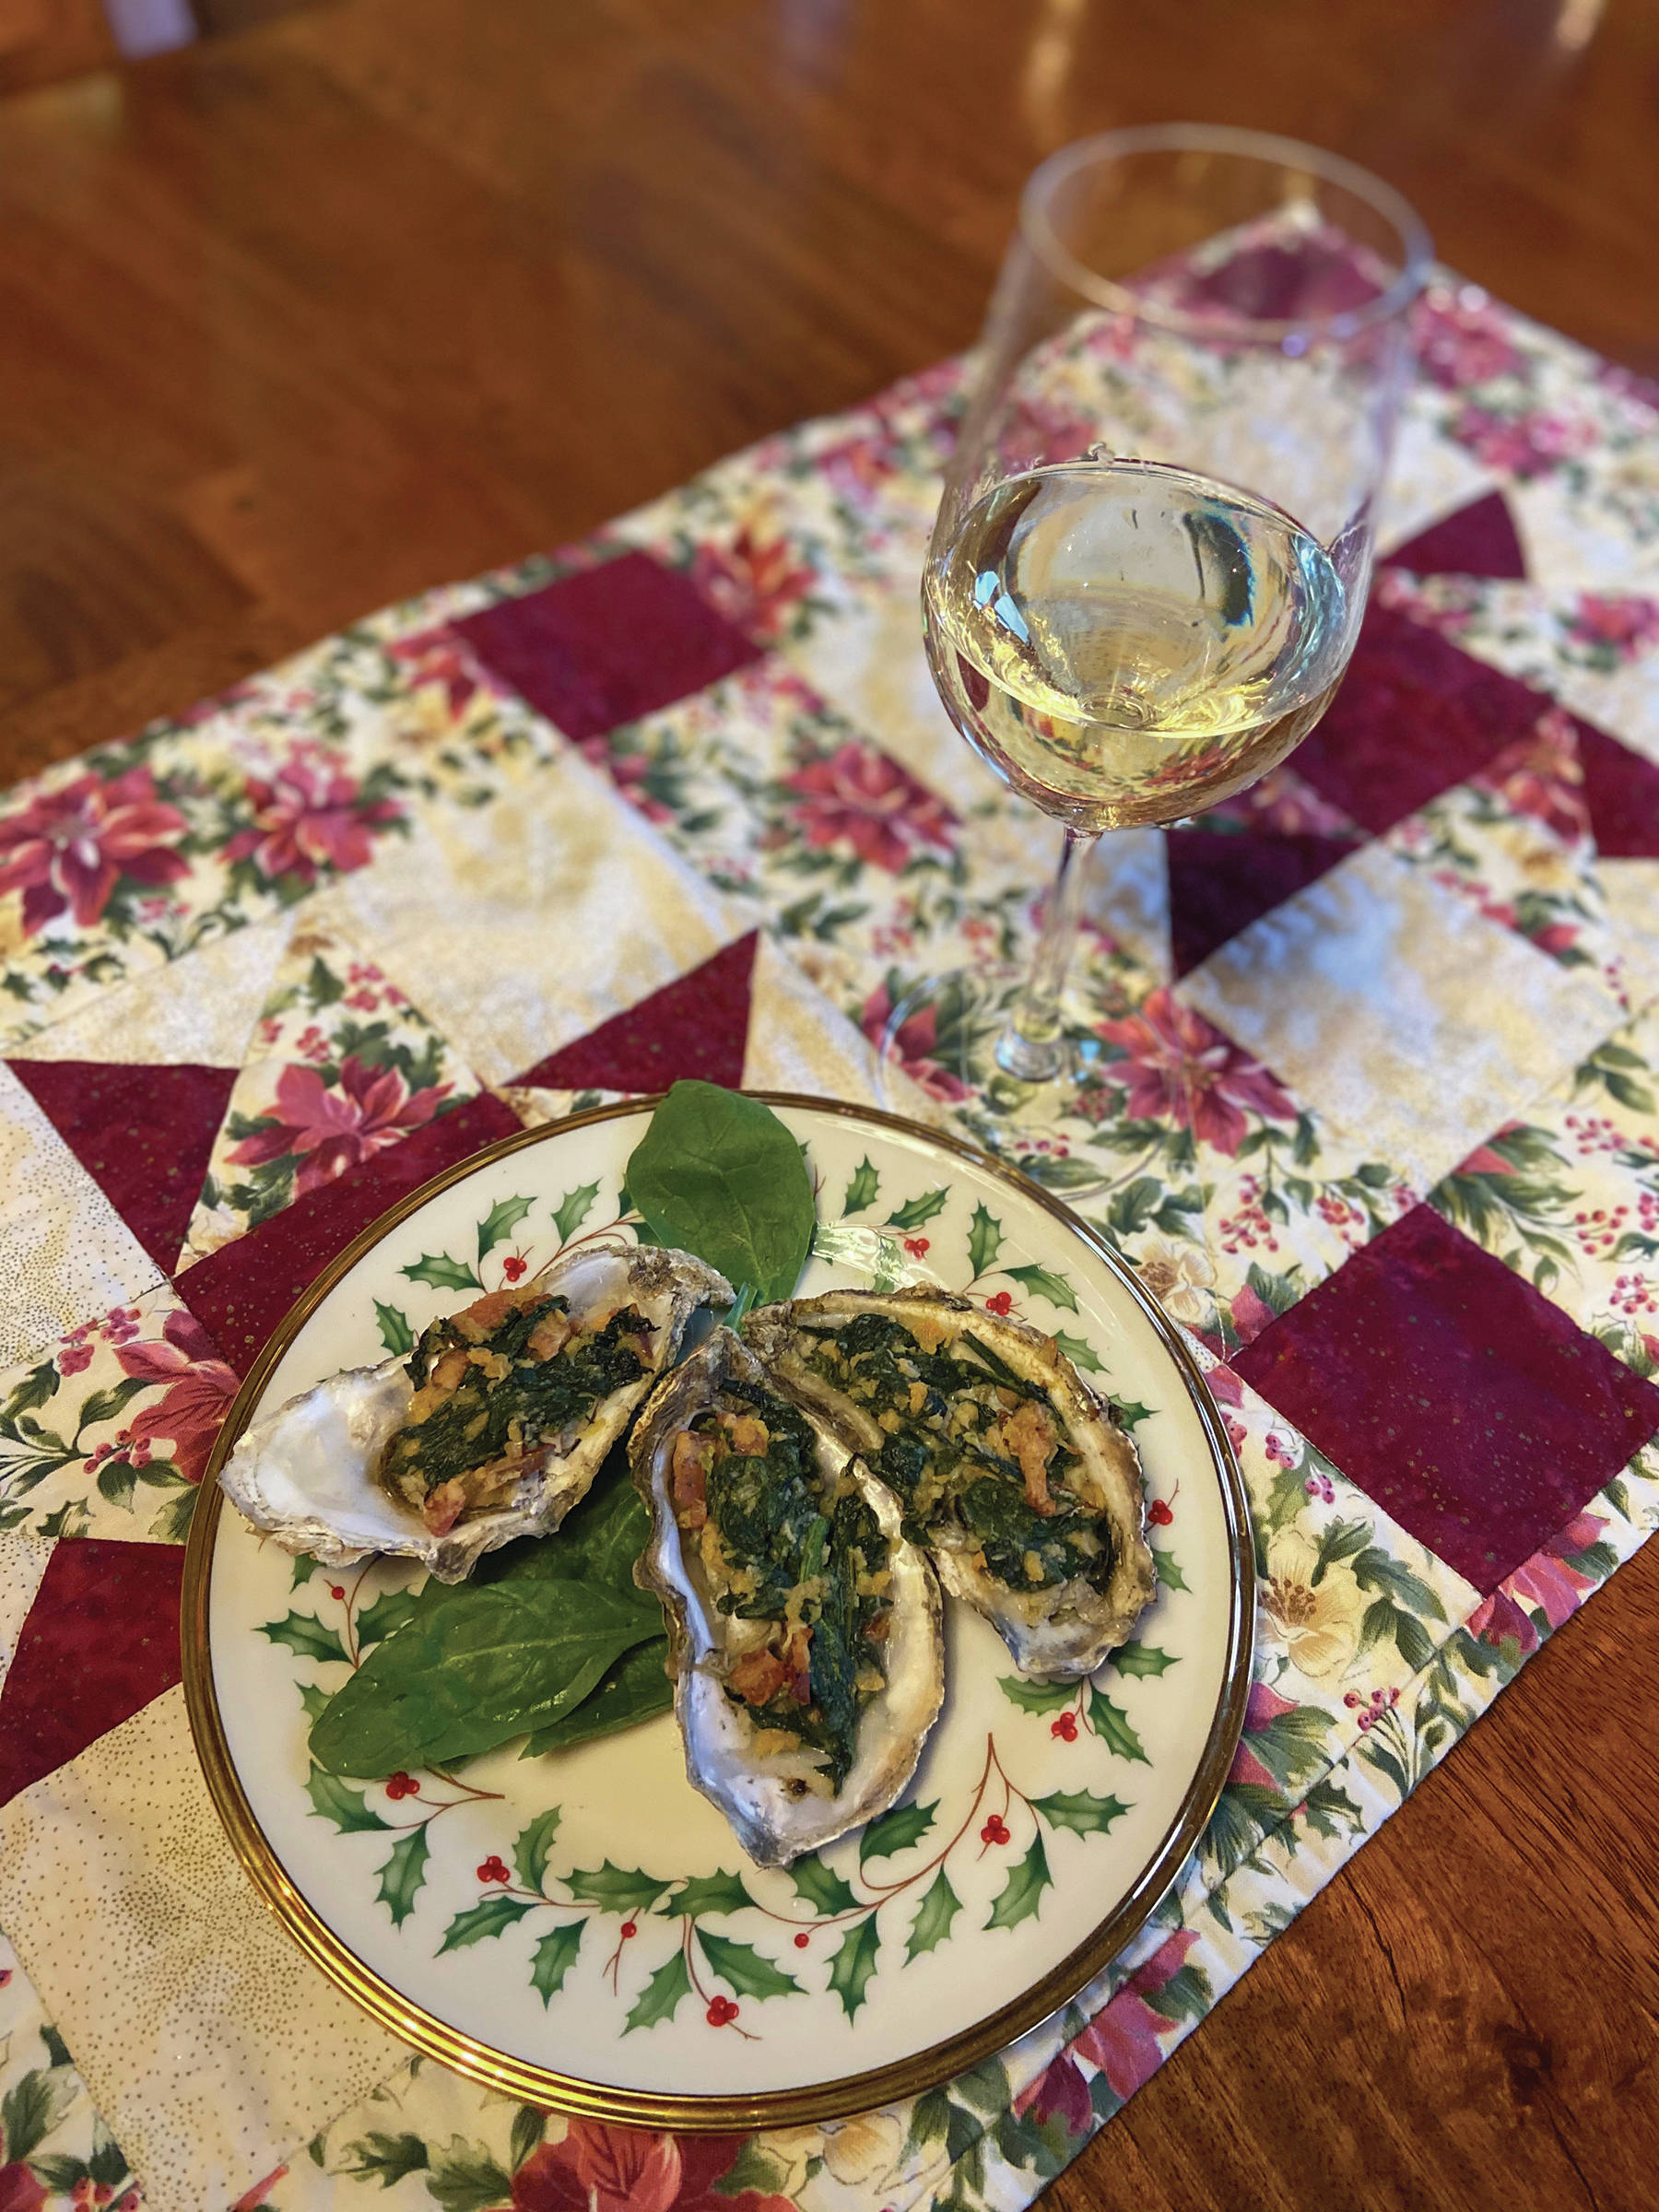 A glass of bubbly and Oysters Rockefeller make the perfect way to toast in the New Year, as seen here in Teri Robl’s kitchen on Dec. 22, 2019, in Homer, Alaska. (Photo by Teri Robl).